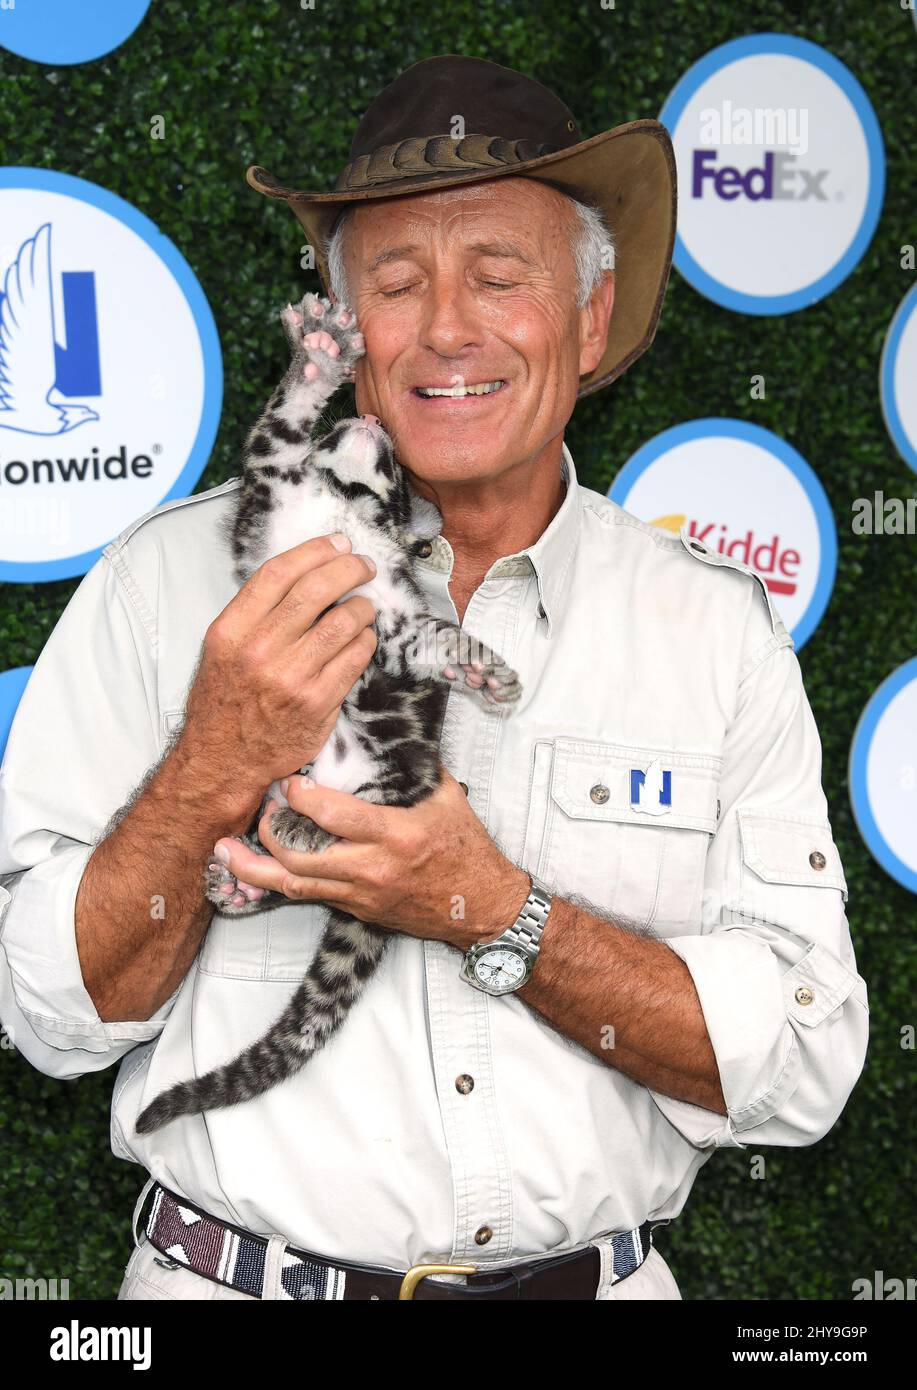 Jack Hanna and Clouded Leopard Cub attending Safe Kids Day at Smashbox Studios in Culver City, California. Stock Photo